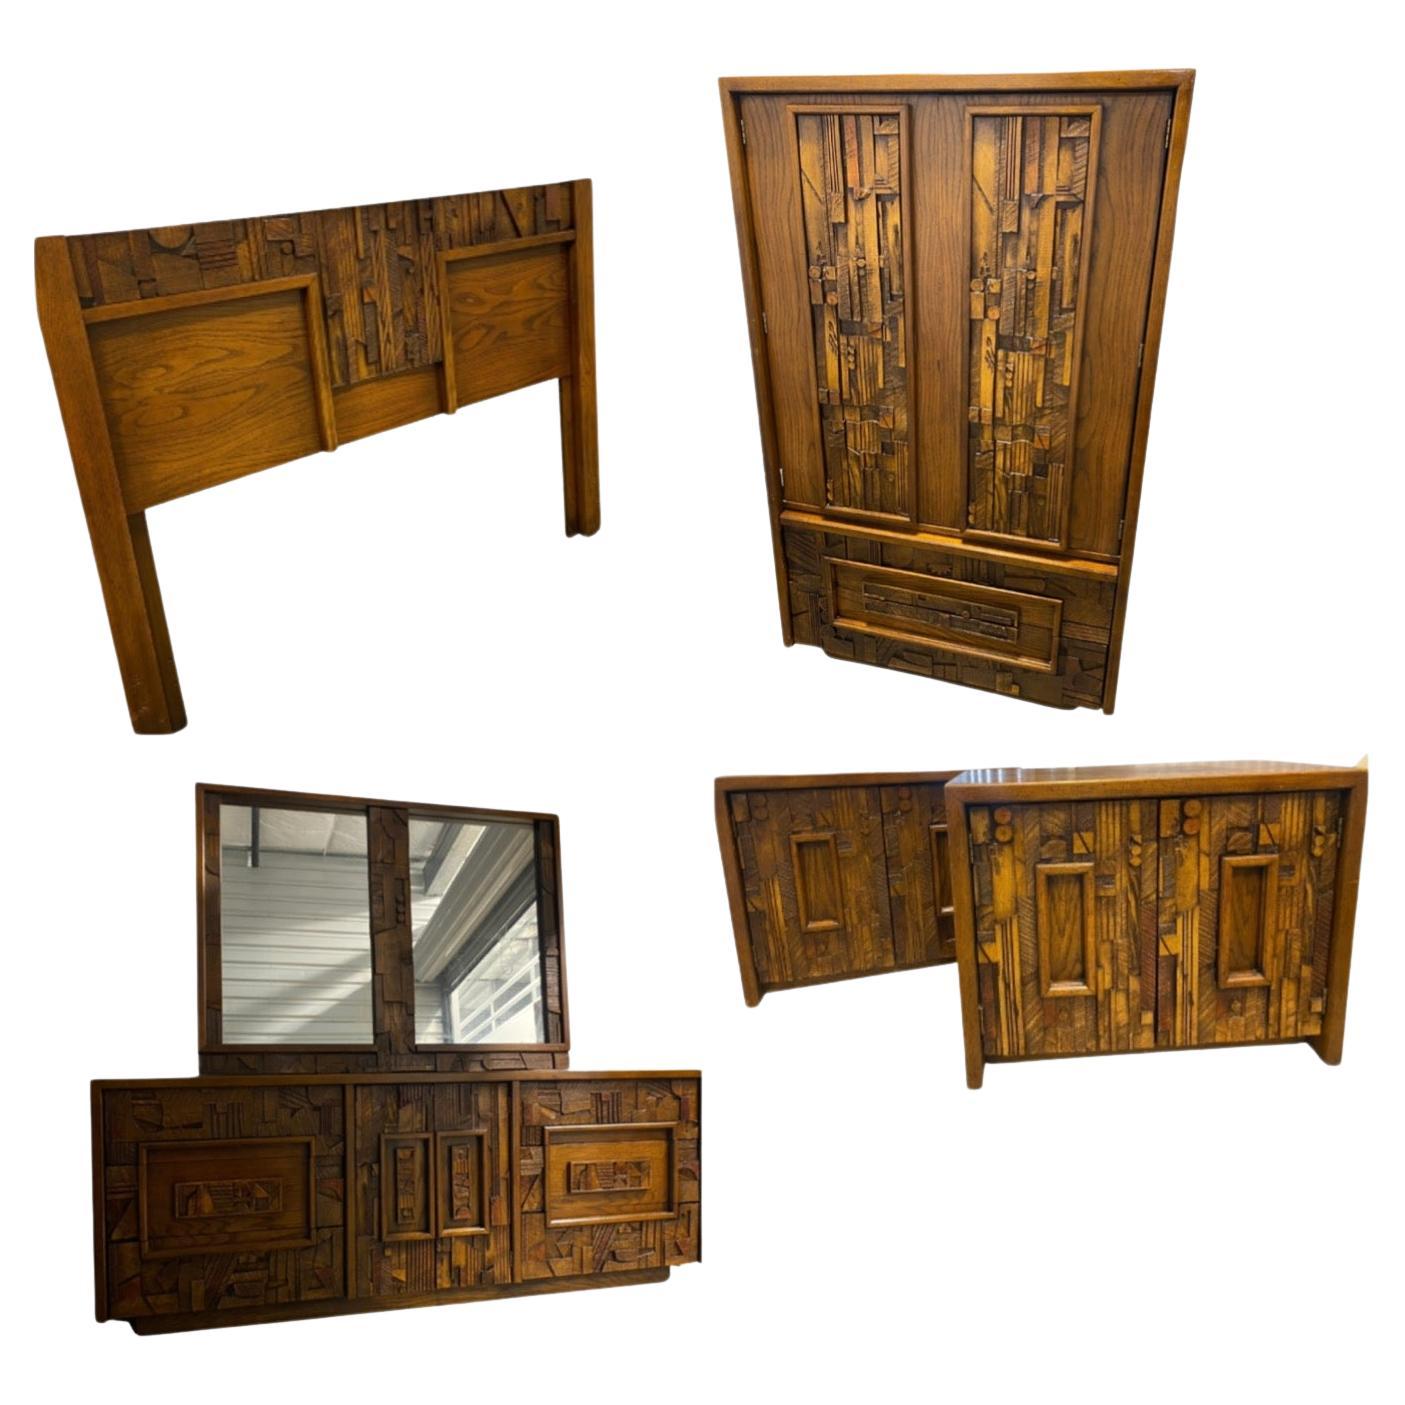 Gorgeous COMPLETE brutalist bedroom set. Made by the iconic Lane Furniture group. Part of their coveted “Pueblo” collection. Dark and sexy.

There is a 3 piece set selling for $5.5k online. This has a total of 6 pieces! Don’t mias this deal!

Long